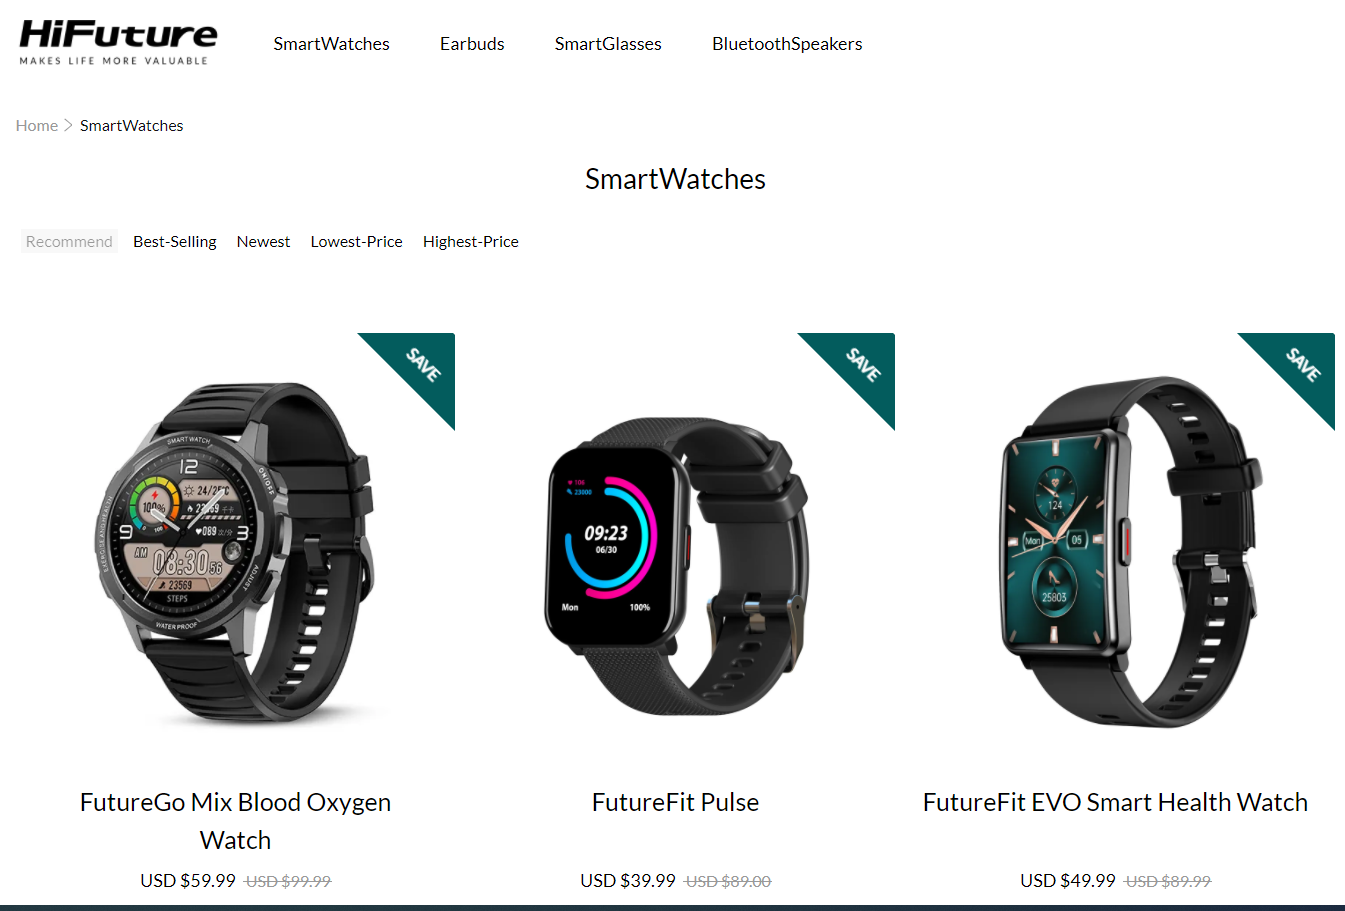 Pick any smartwatch from HiFuture